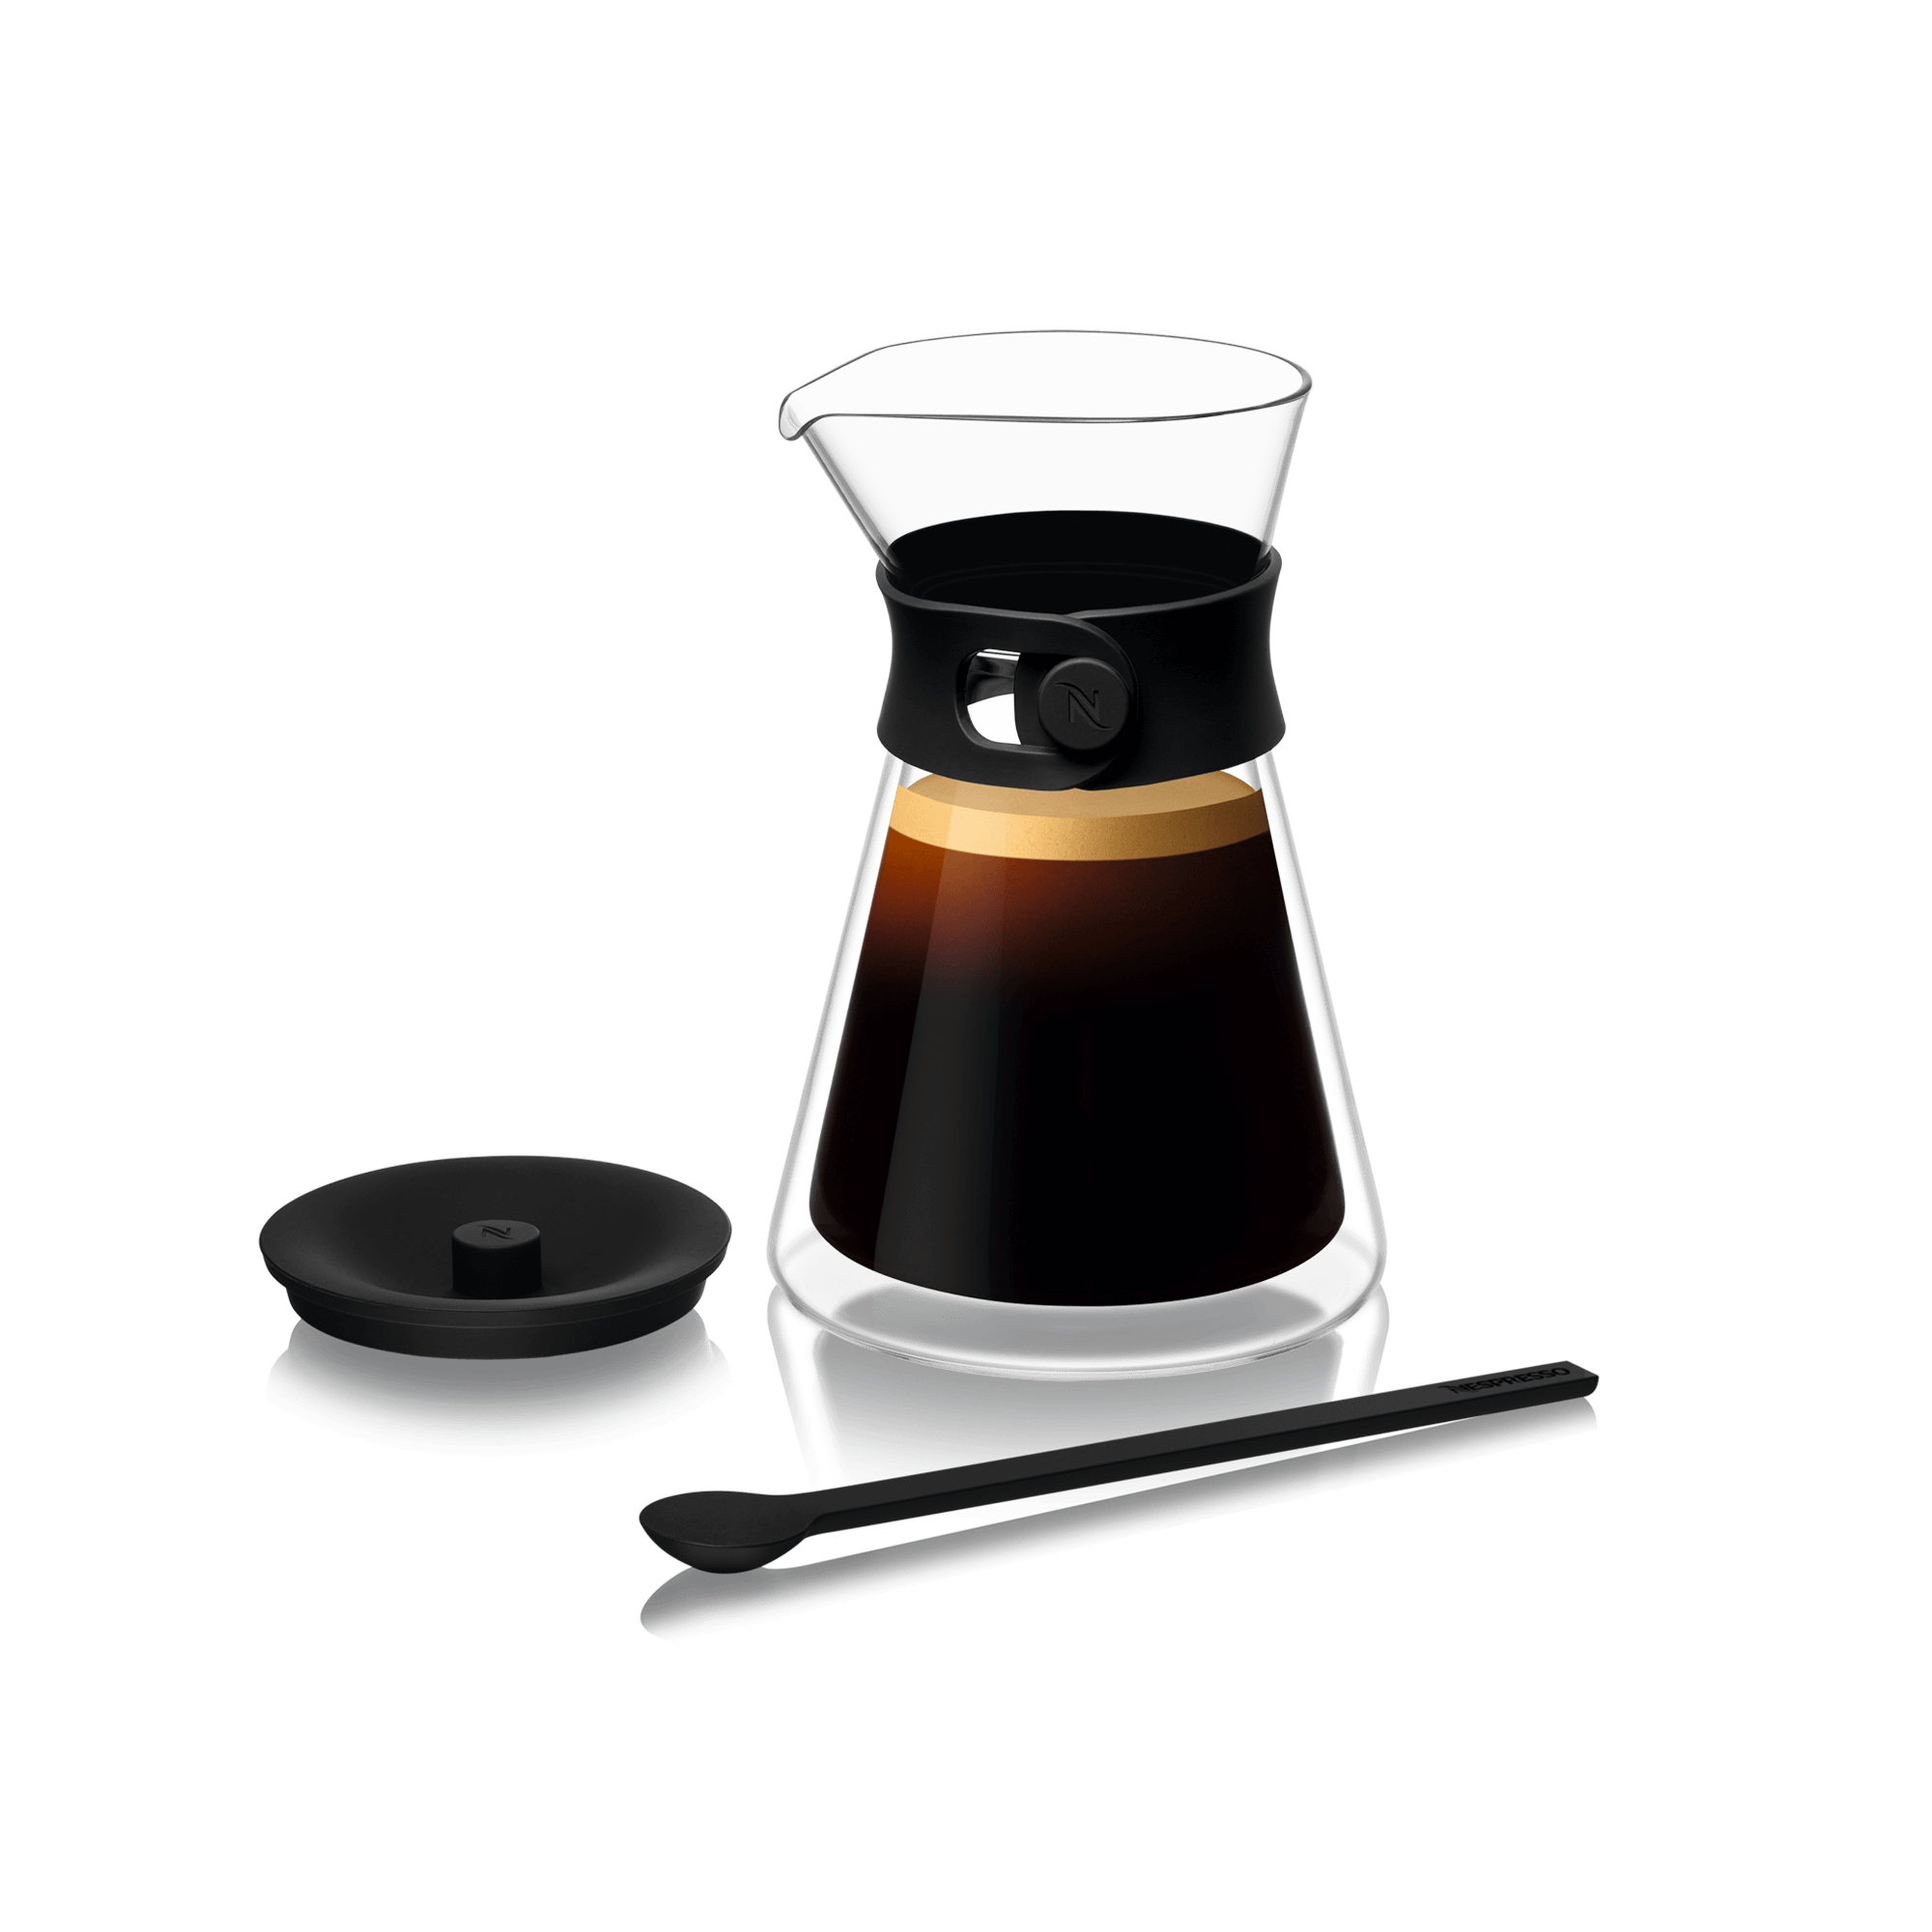 Vertuo Next Carafe Set, Vertuo Collection